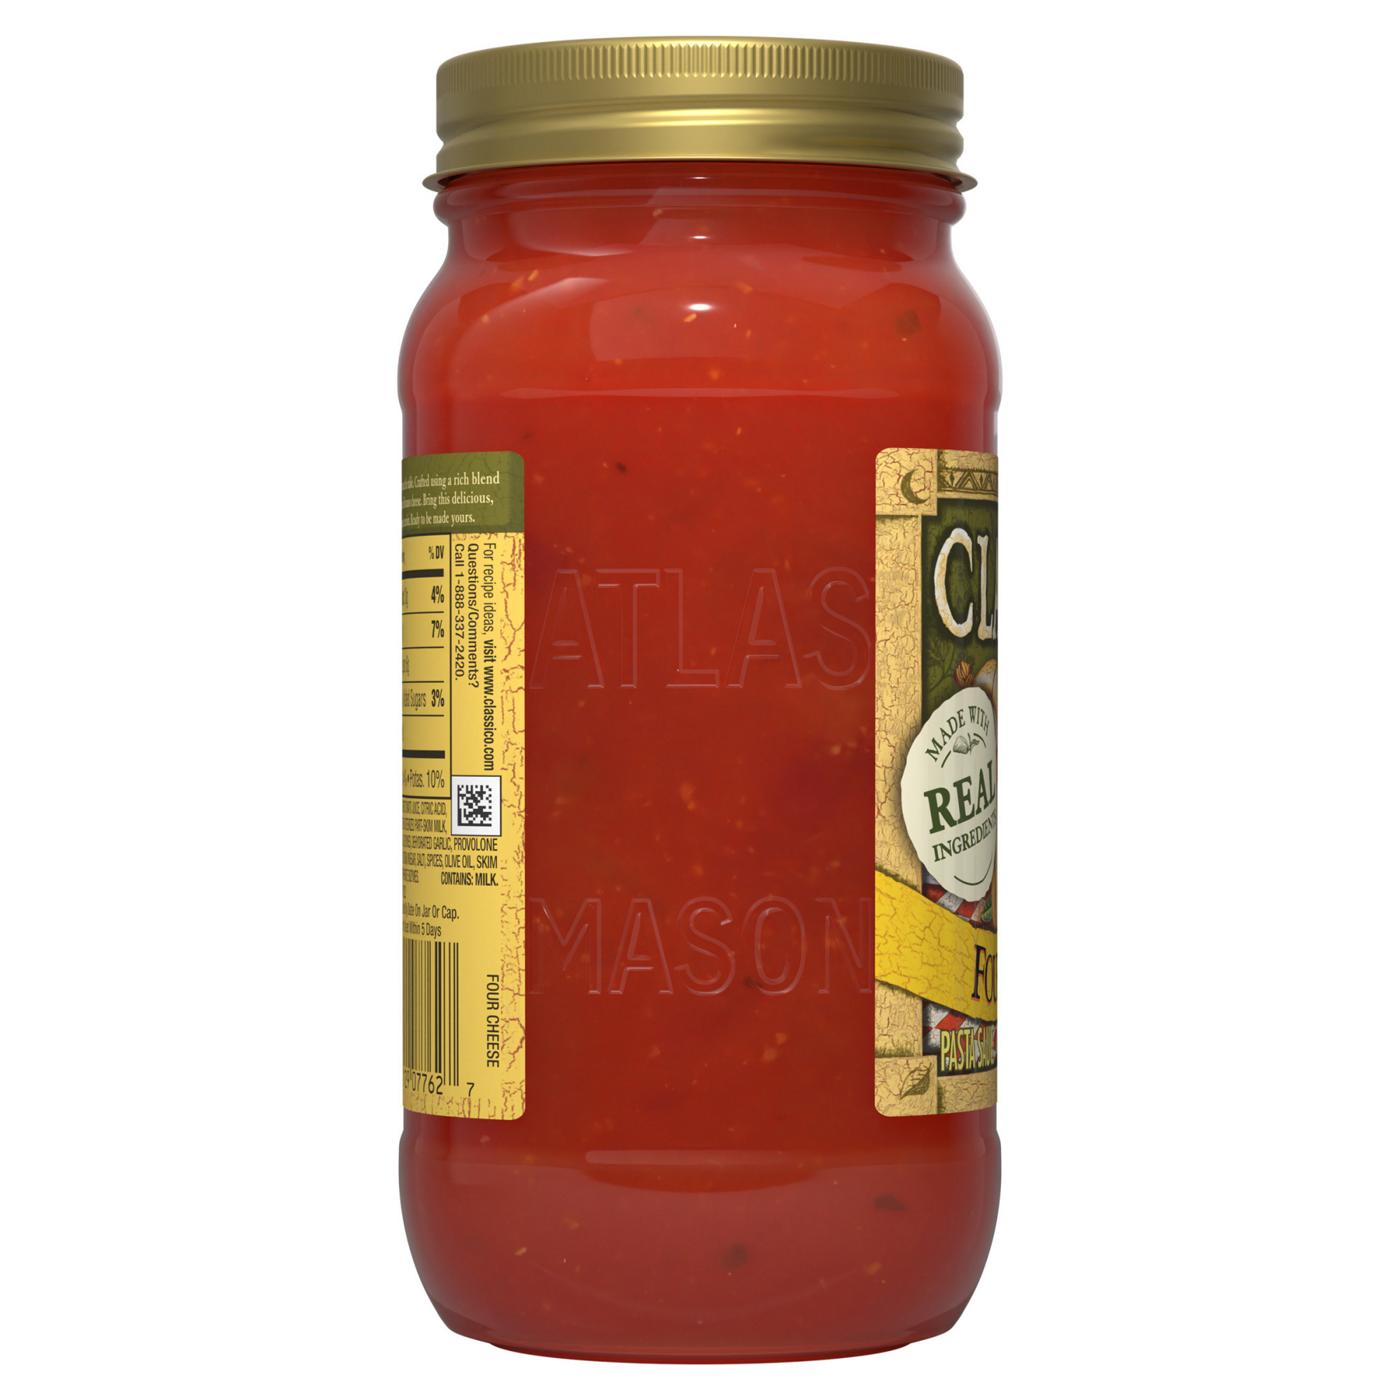 Classico Four Cheese Pasta Sauce; image 7 of 9